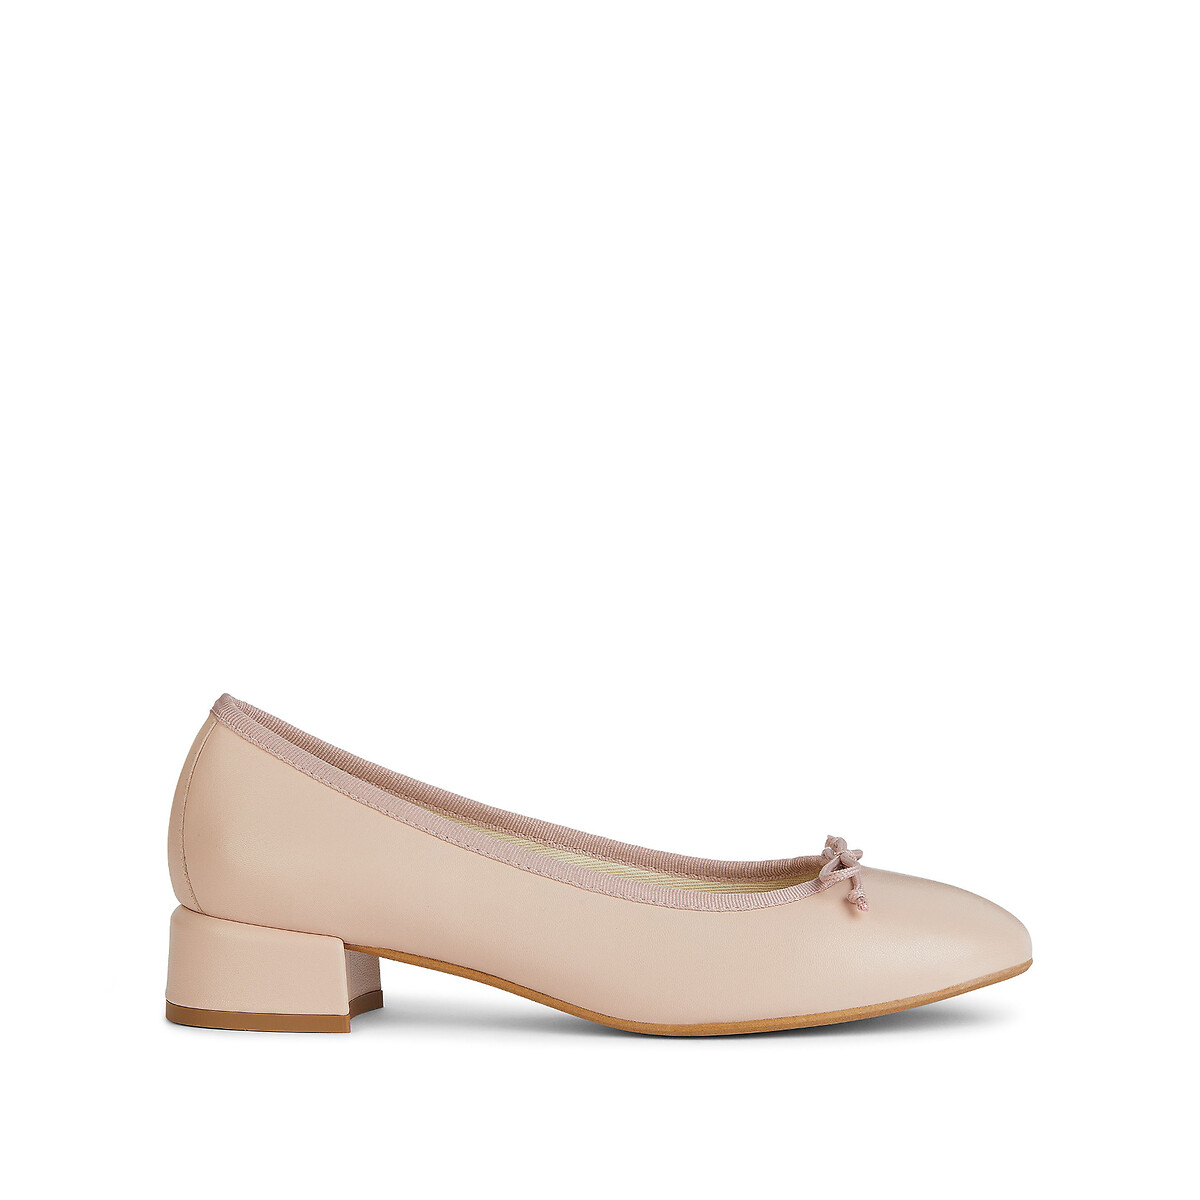 Image of Floretia Leather Ballet Pumps with Low Heel